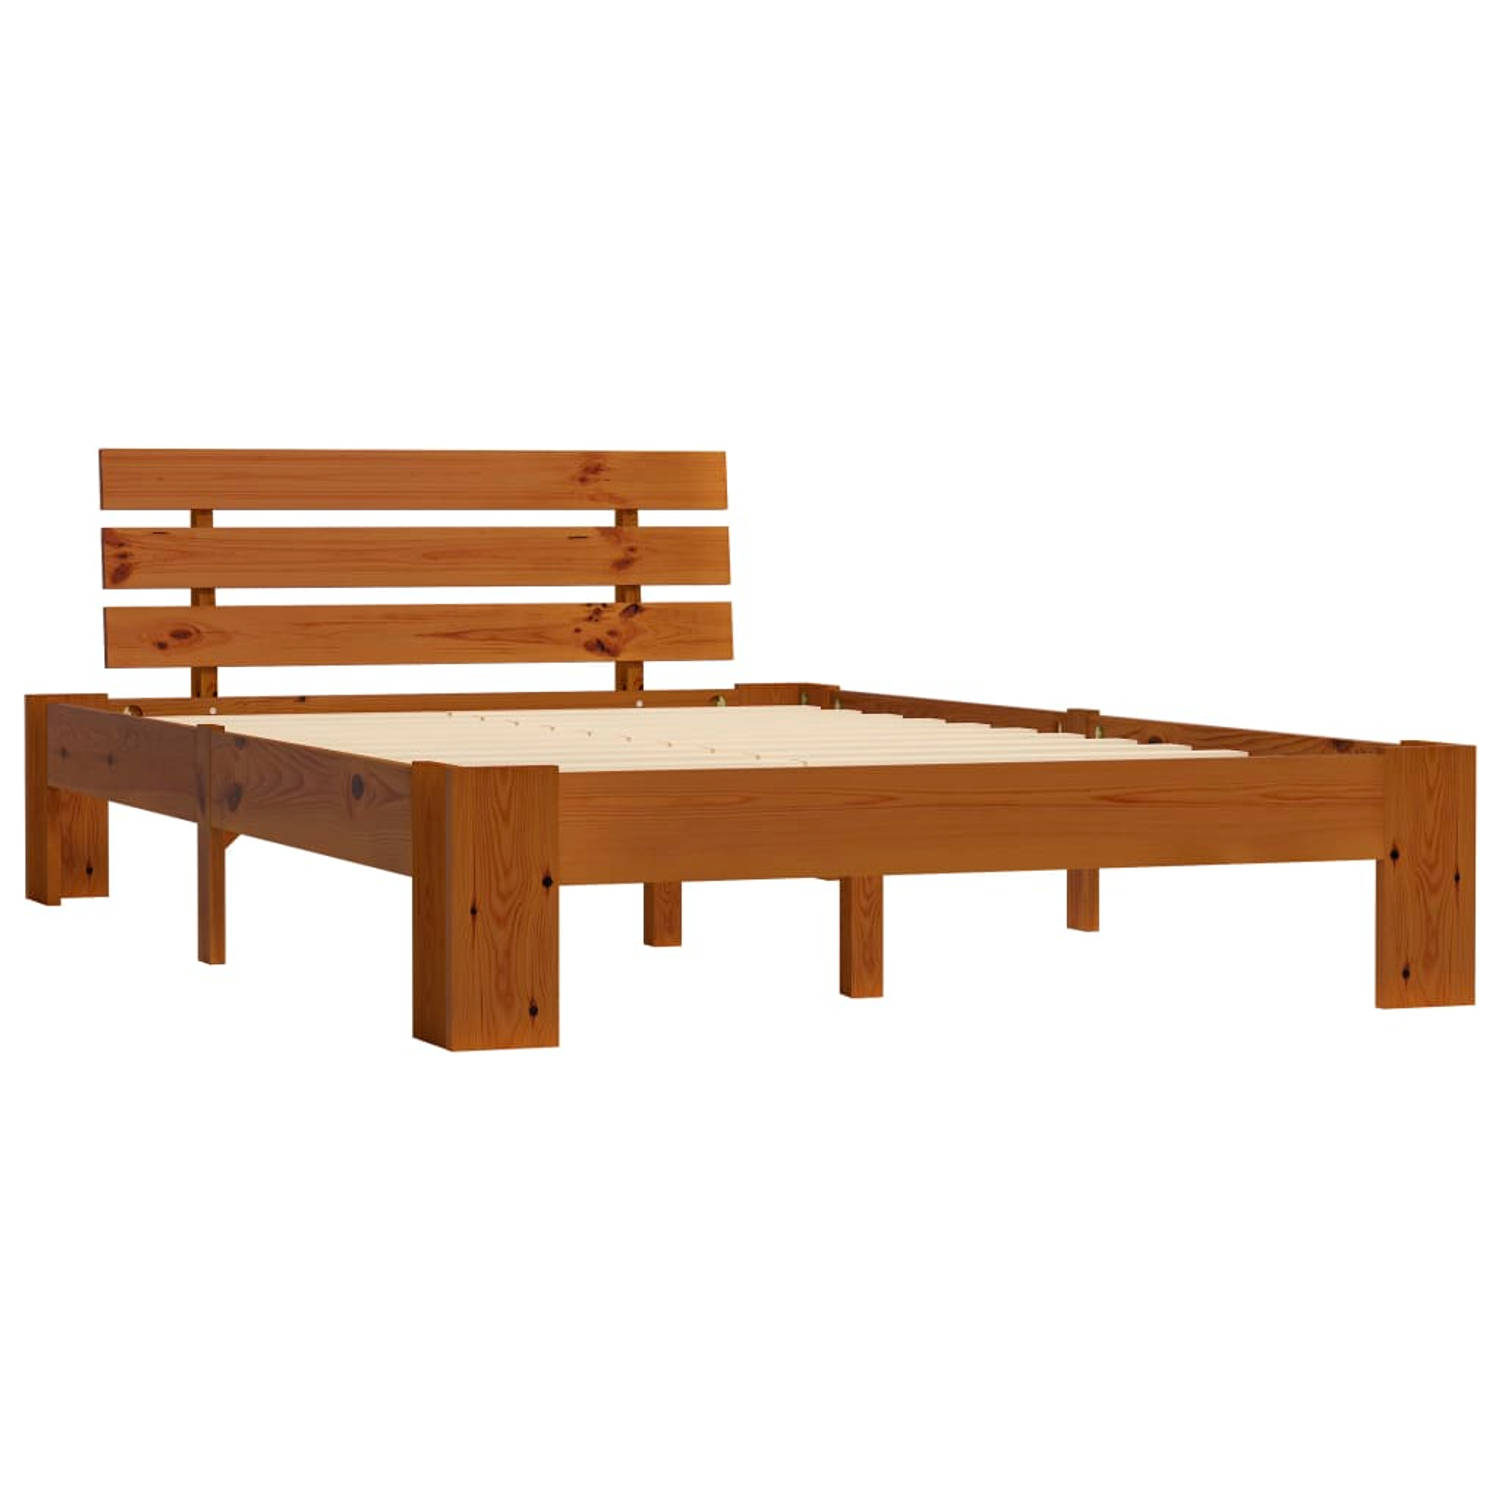 The Living Store Bedframe massief grenenhout honingbruin 140x200 cm - Bed